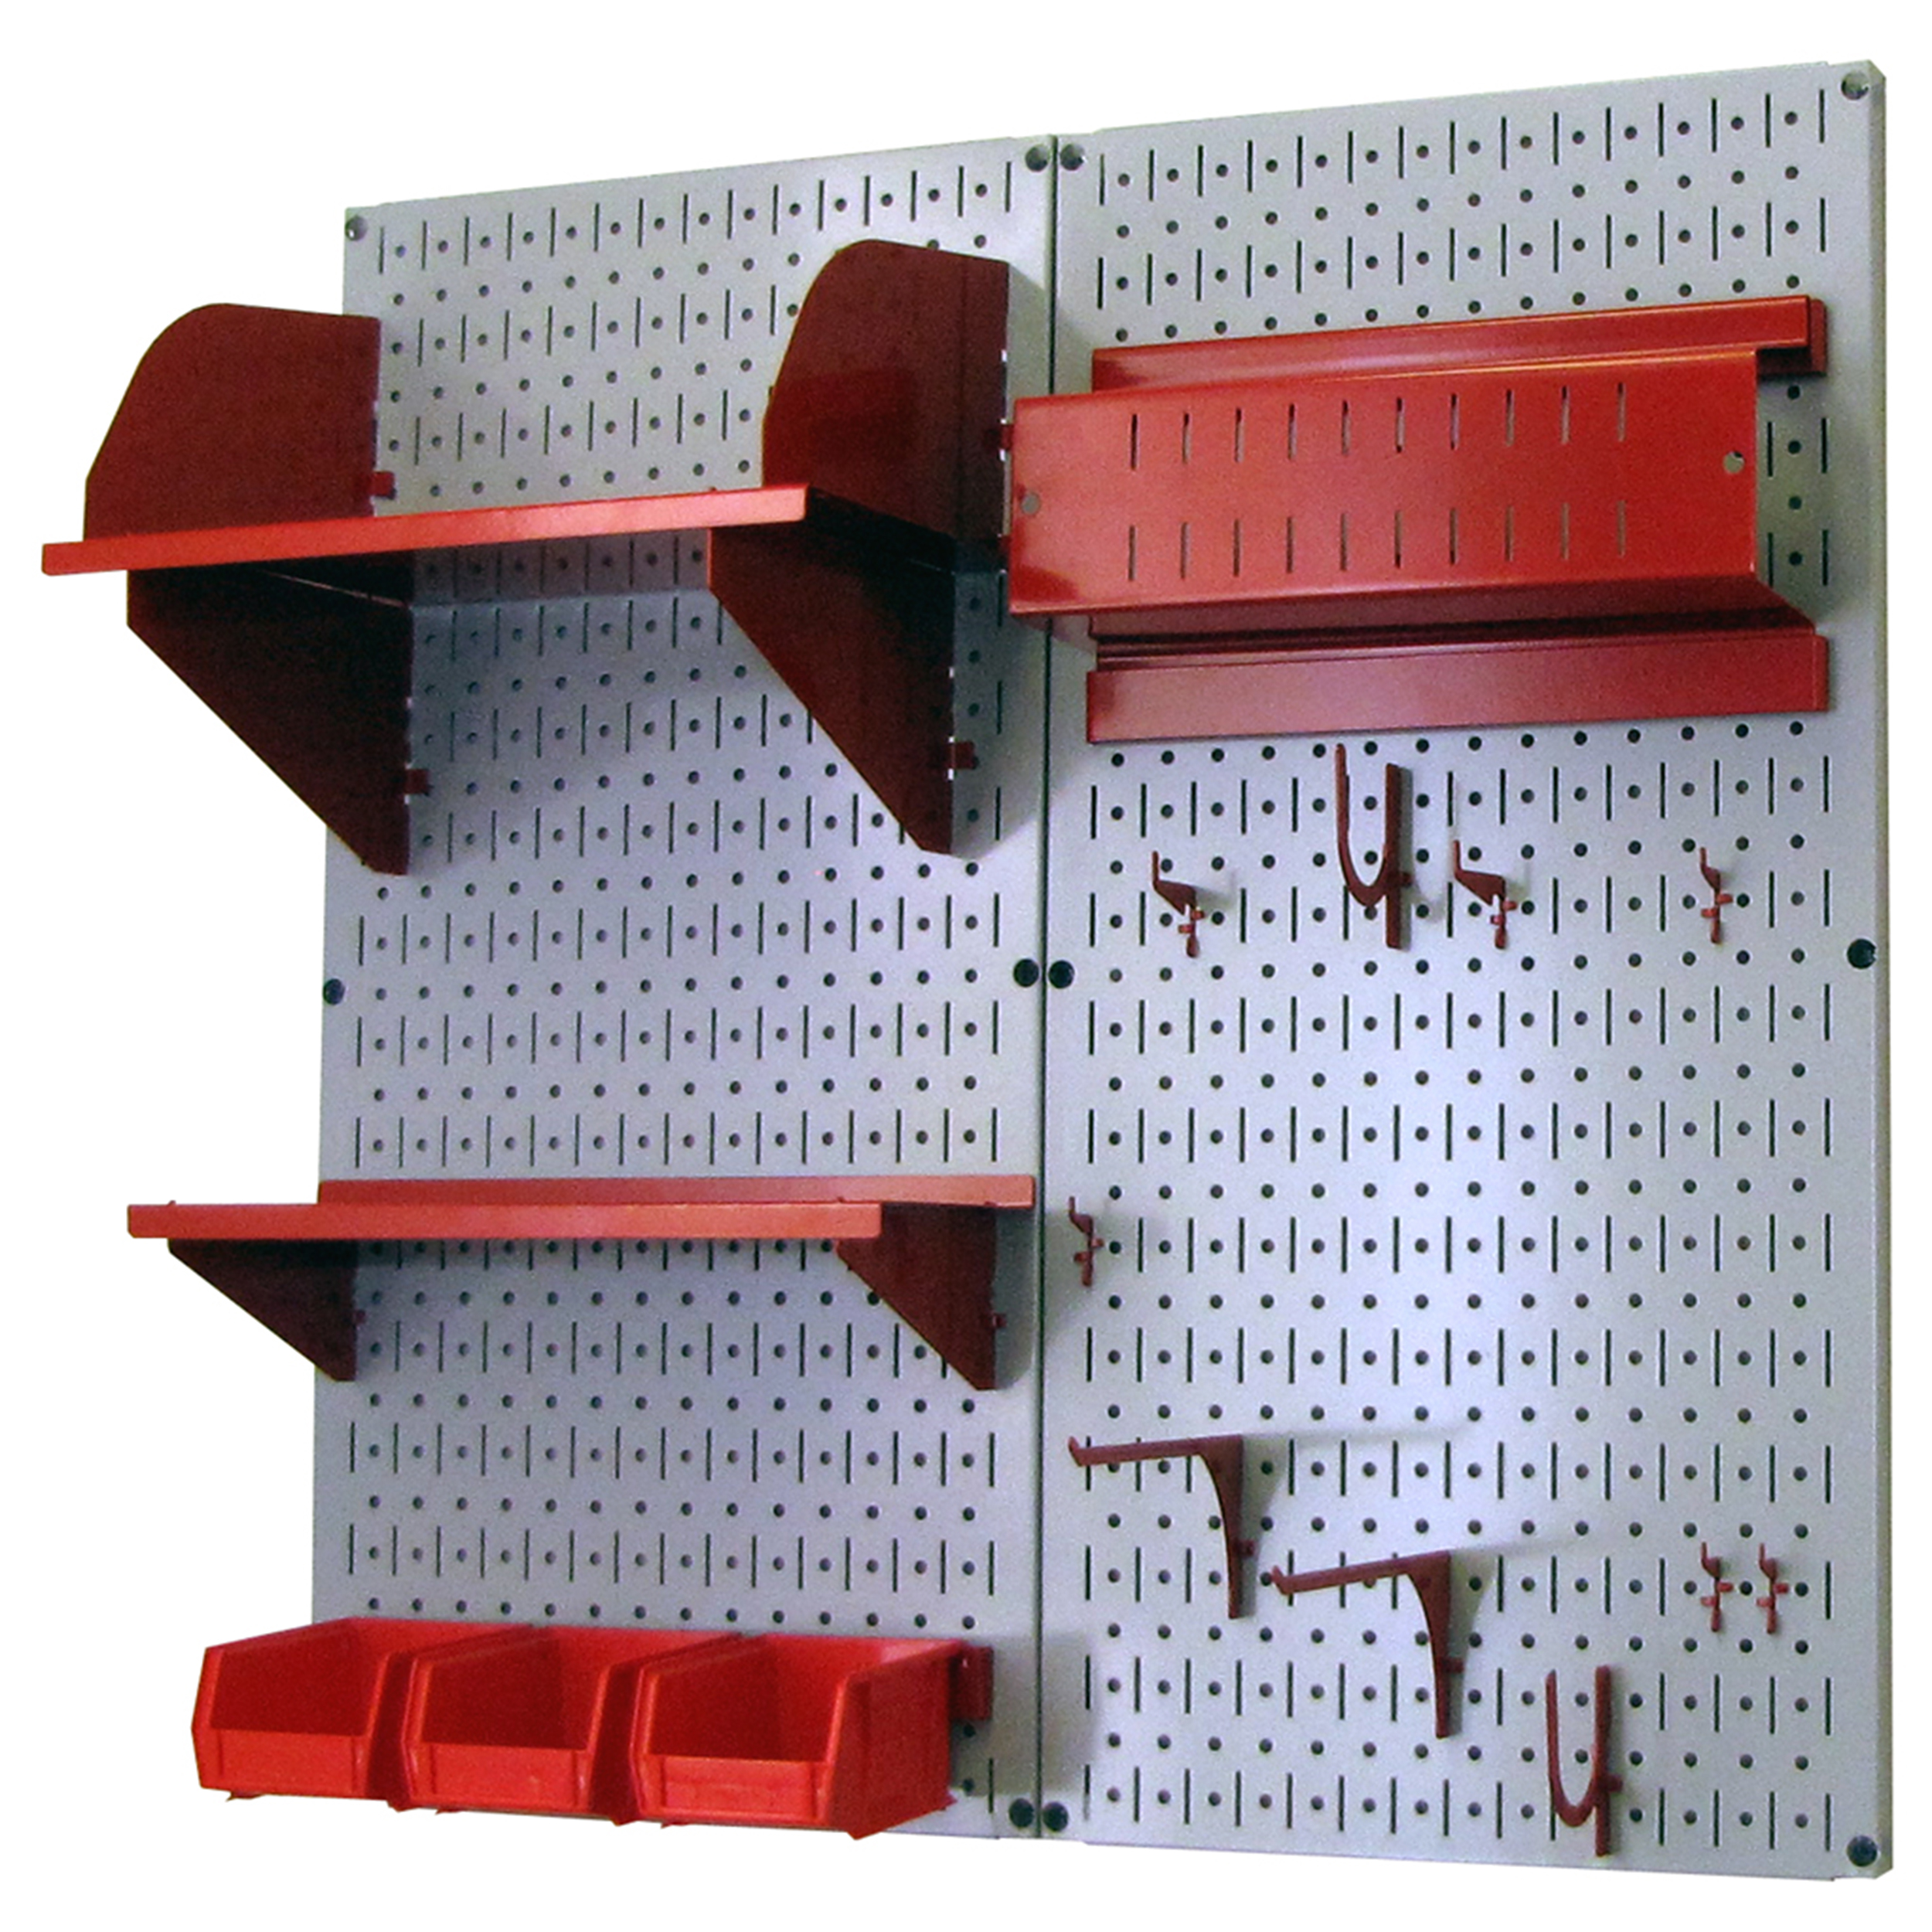 Pegboard Hobby Craft Pegboard Organizer Storage Kit With Gray Pegboard And Red Accessories